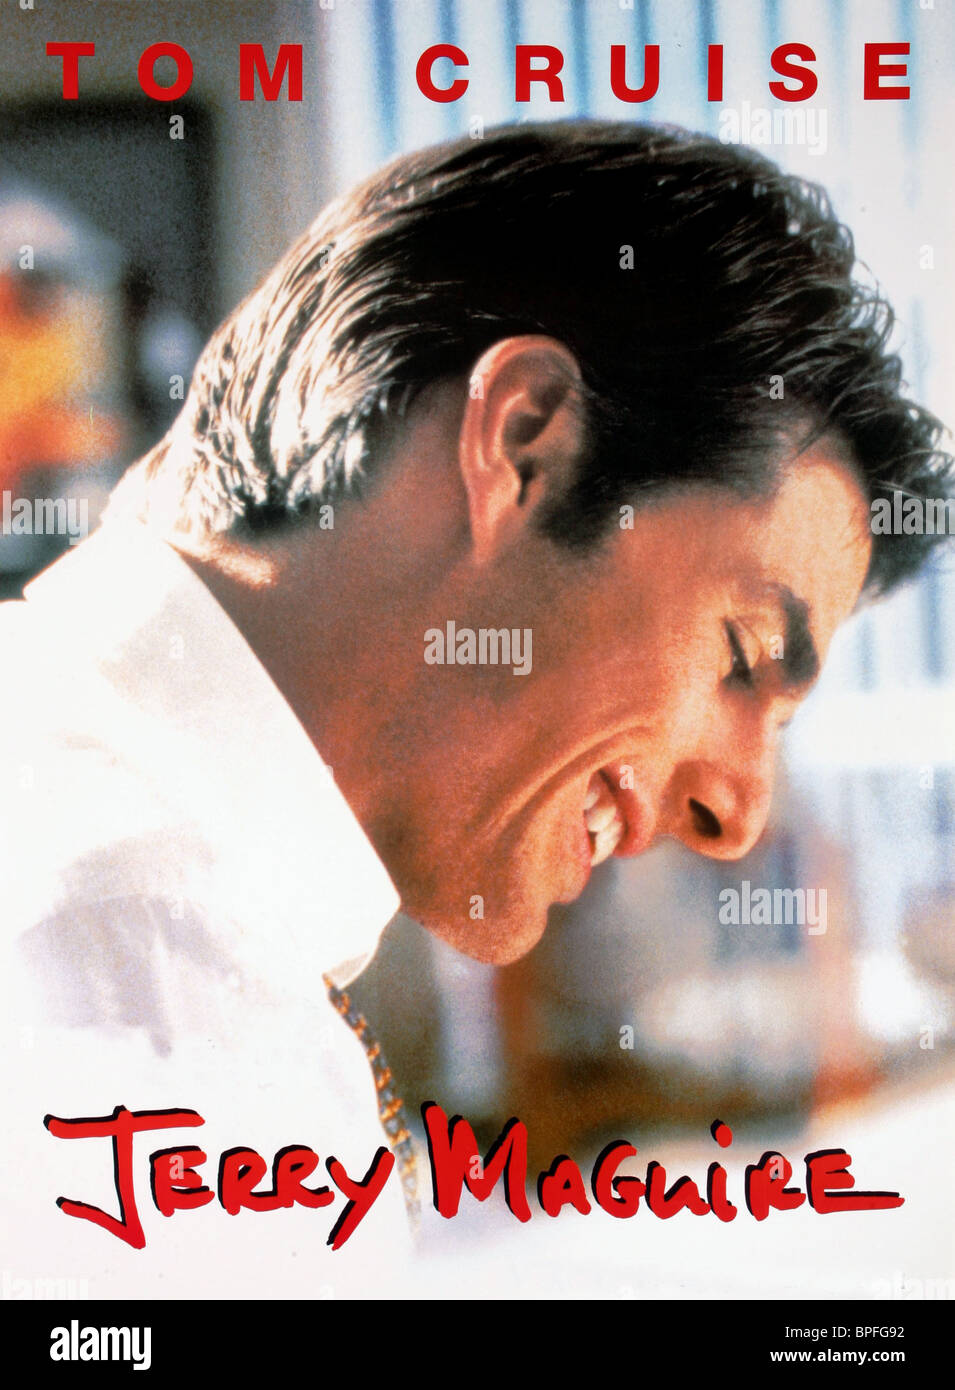 TOM CRUISE POSTER JERRY MAGUIRE (1996 Stock Photo - Alamy